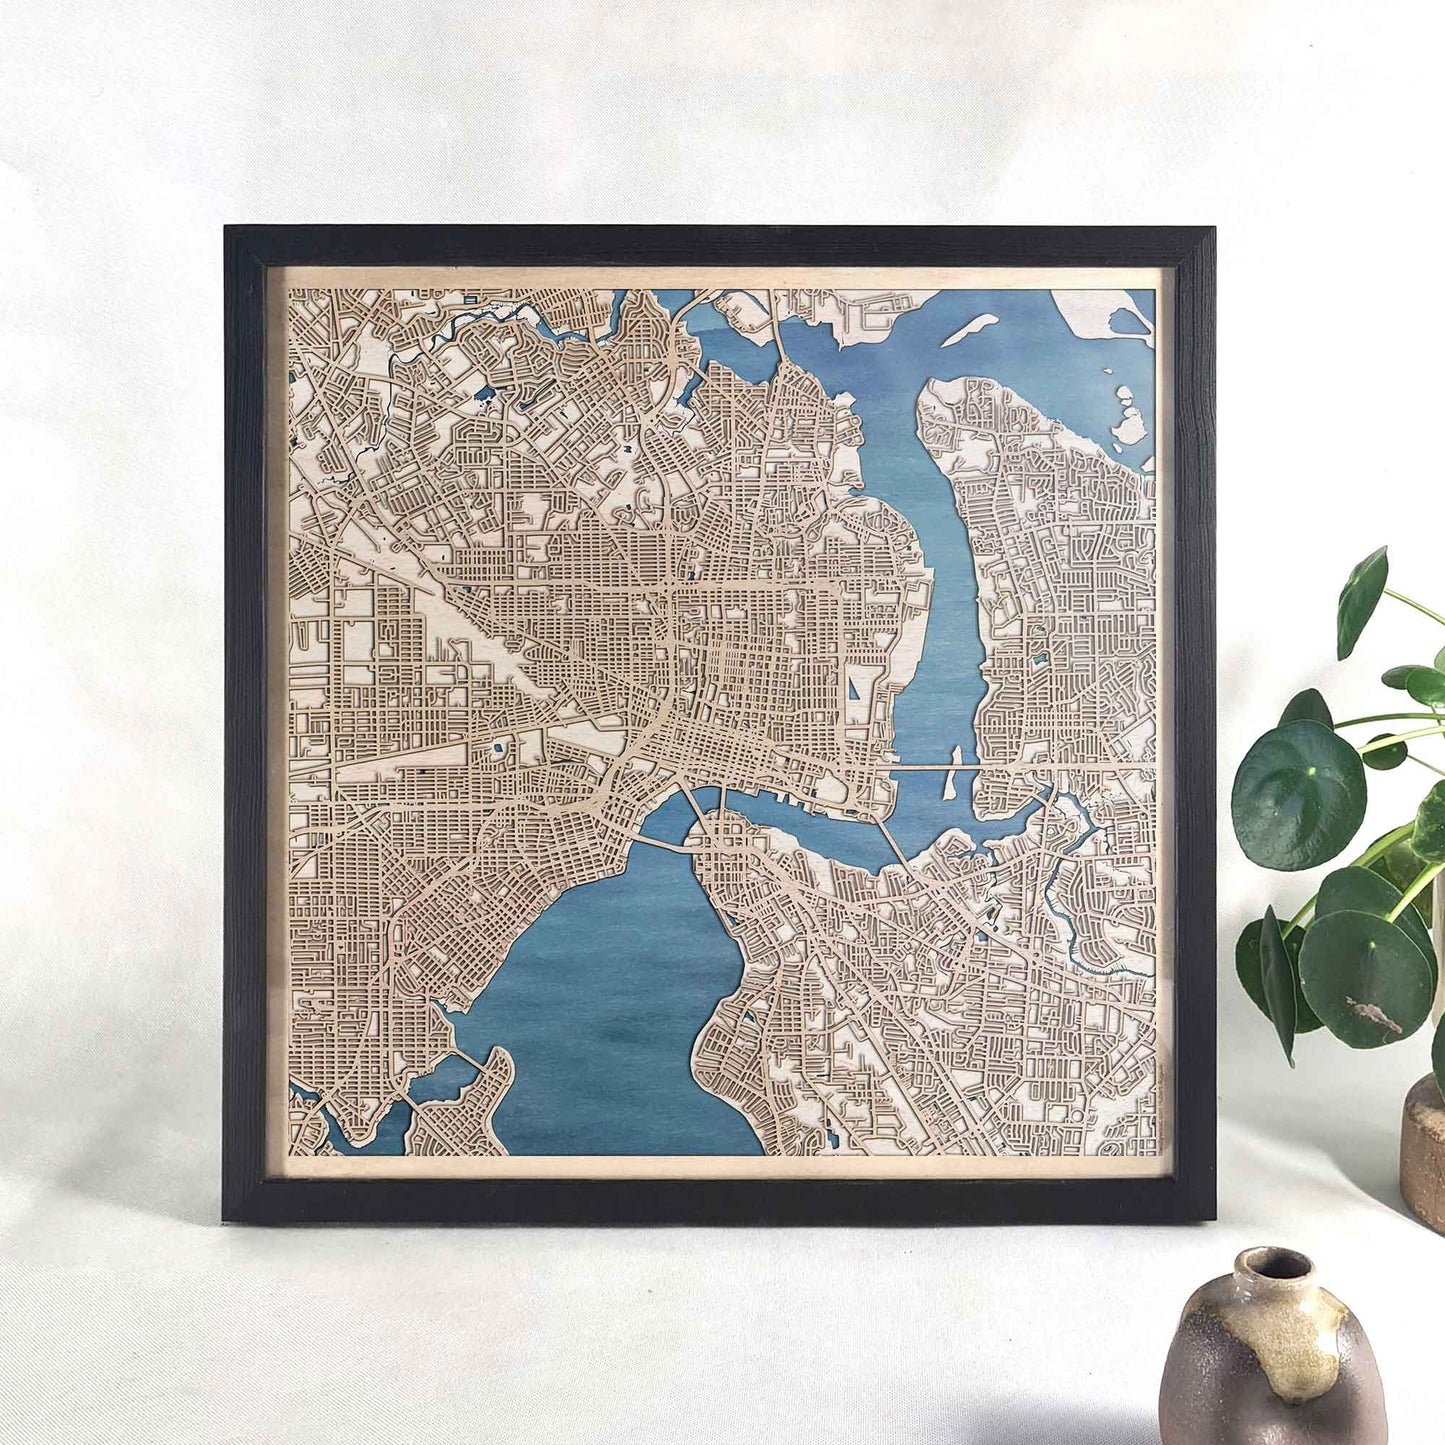 Jacksonville Wooden Map by CityWood - Custom Wood Map Art - Unique Laser Cut Engraved - Anniversary Gift